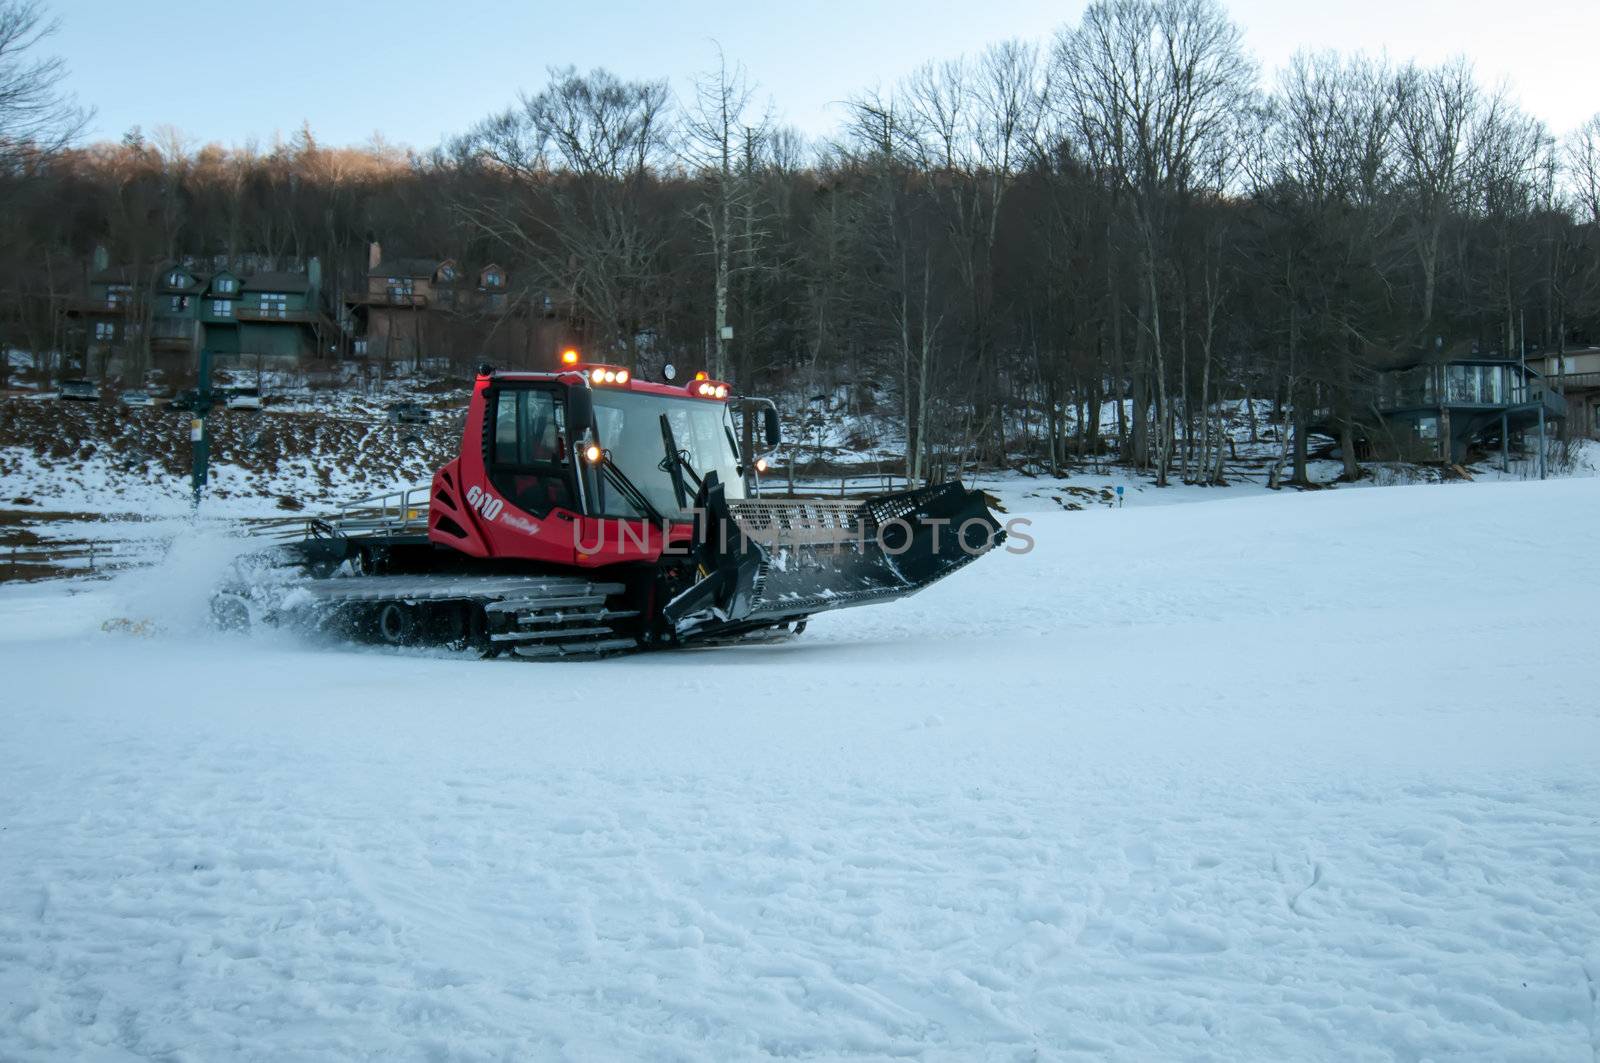 snow grooming machine at work smoothing out ski slope for skiing